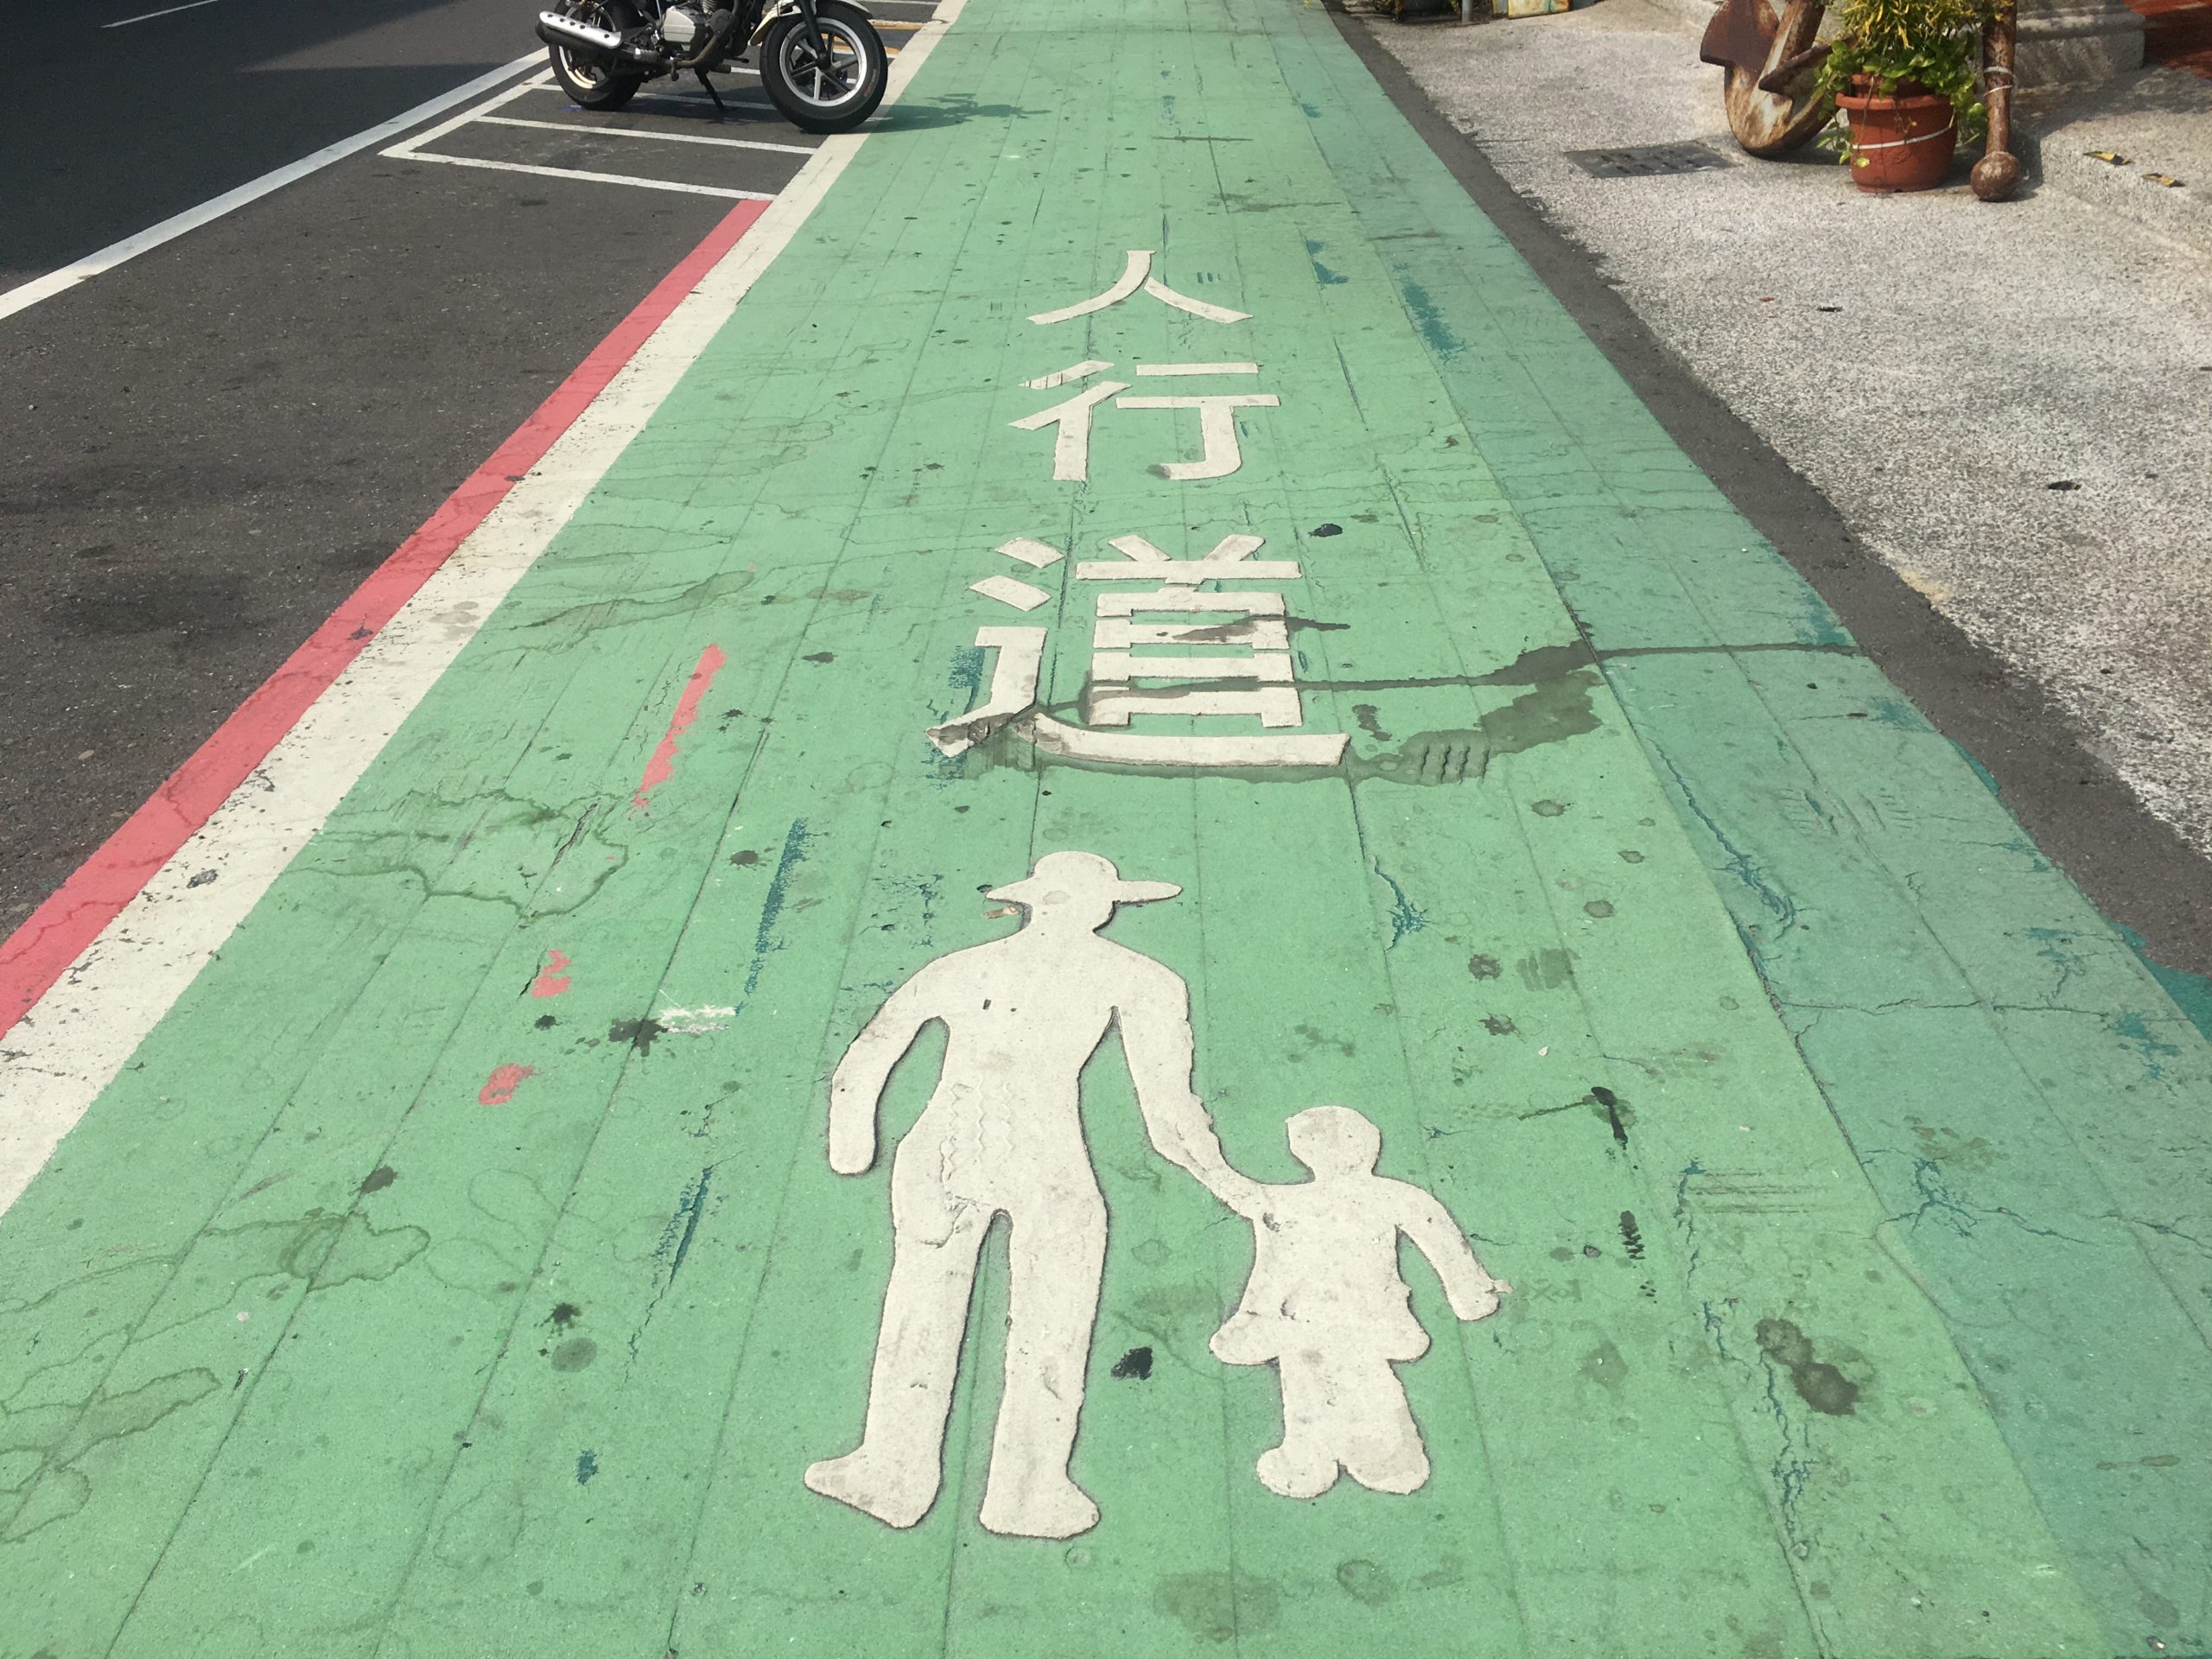 Kaohsiung safety first sign